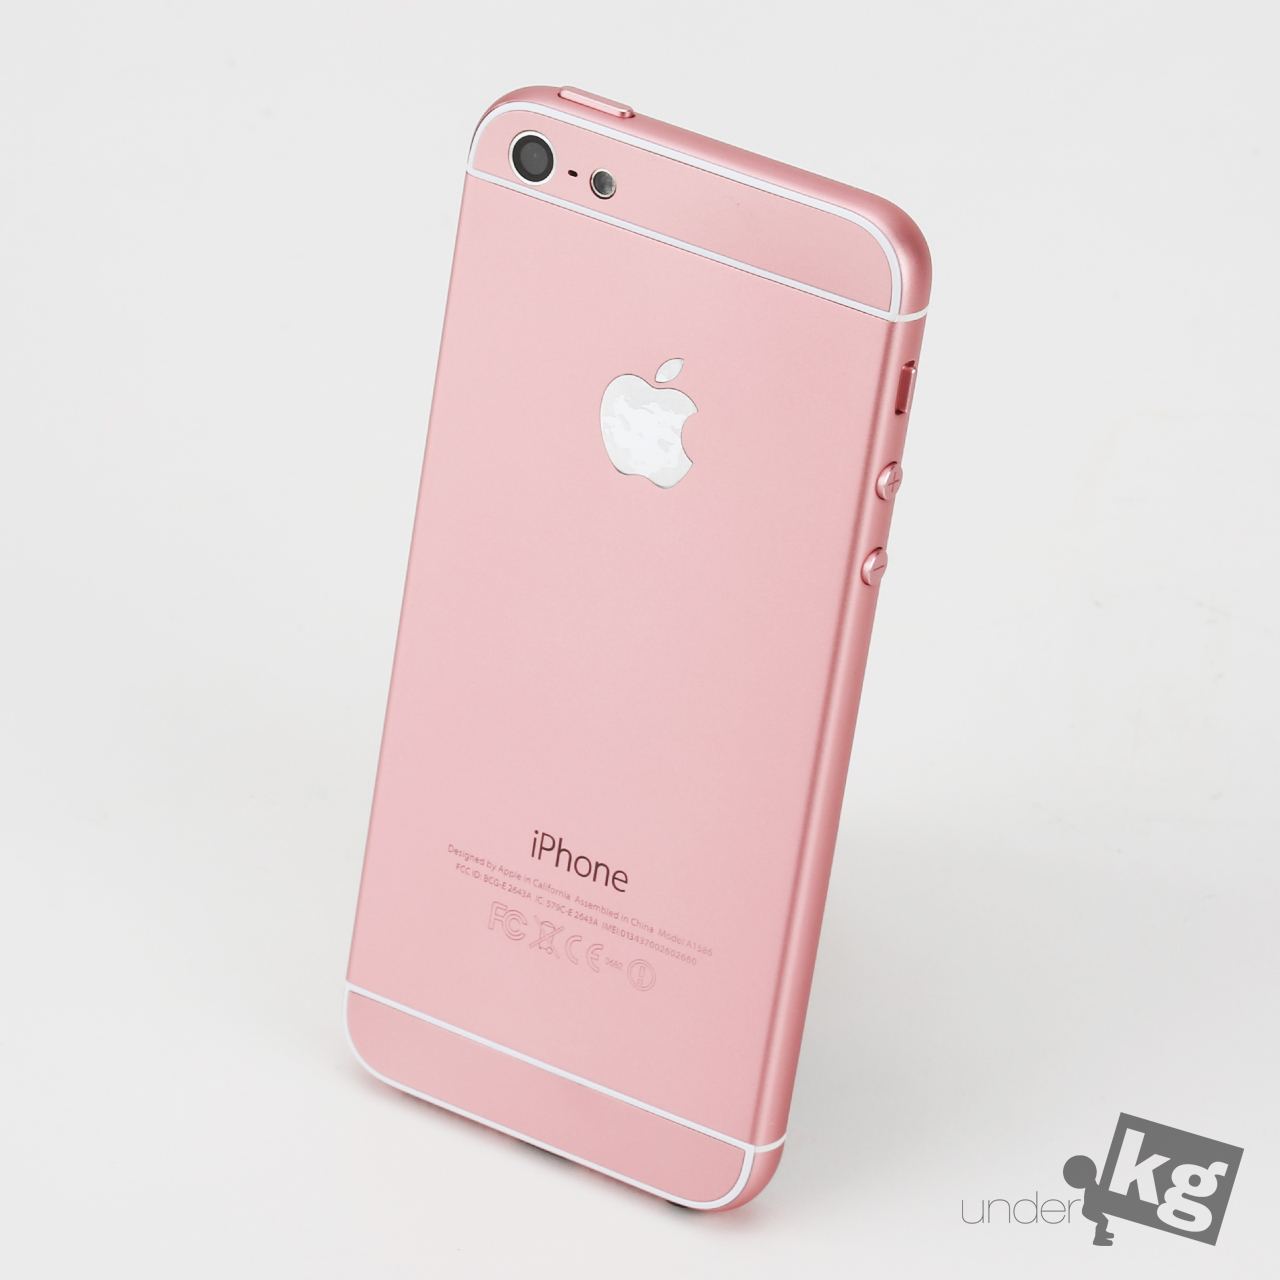 iphone5-to-iphone6-housing-change-pic2.jpg